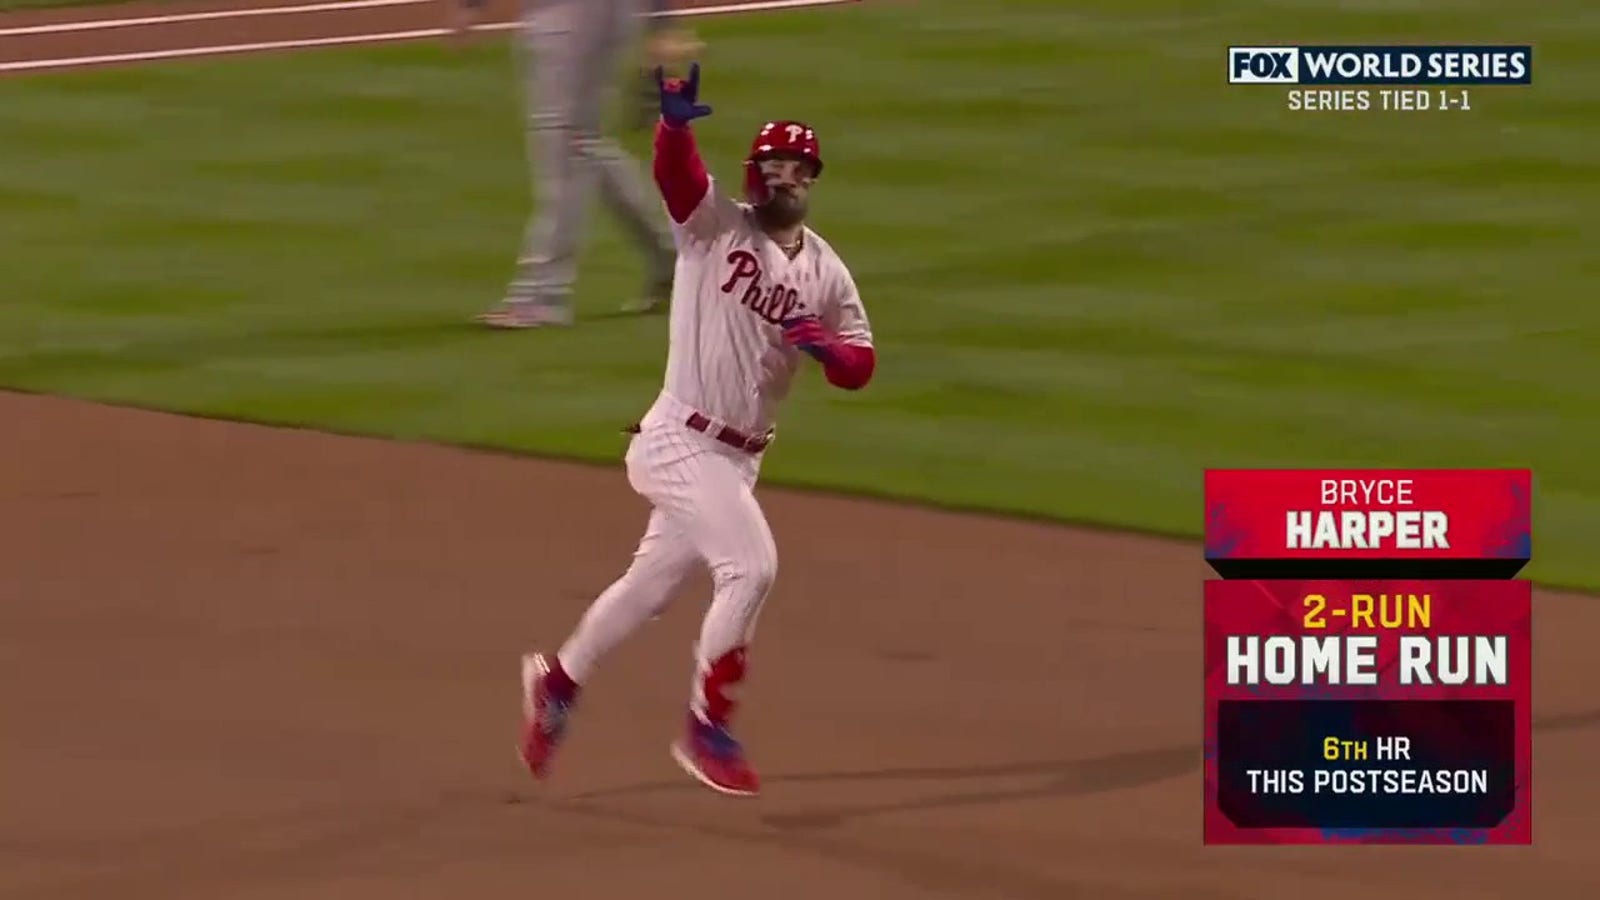 Bryce Harper cranks a two-run home run to give the Phillies an early 2-0 lead